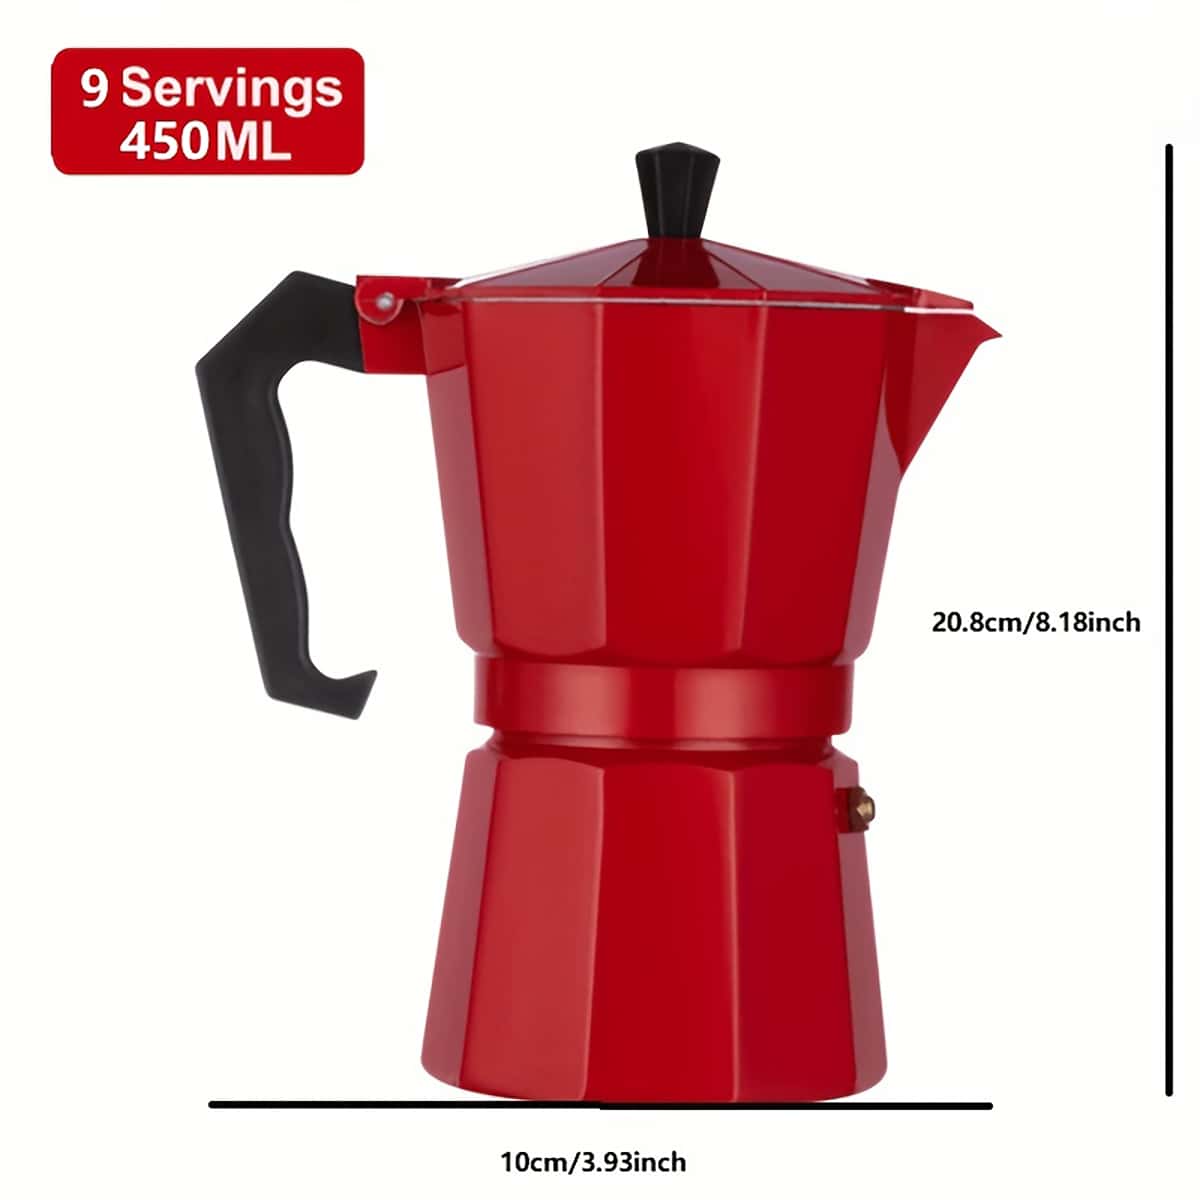 SHEIN 150/30ml Practical Aluminum Moka Pot Espresso Coffee Maker With Filter, When Using An Open Flame, Do Not Set The Fire Too High Or Exceed The Level Of The Lower Section. The Temperature During Coffee Brewing Needs To Be Over 100 Degrees Celsius, And 